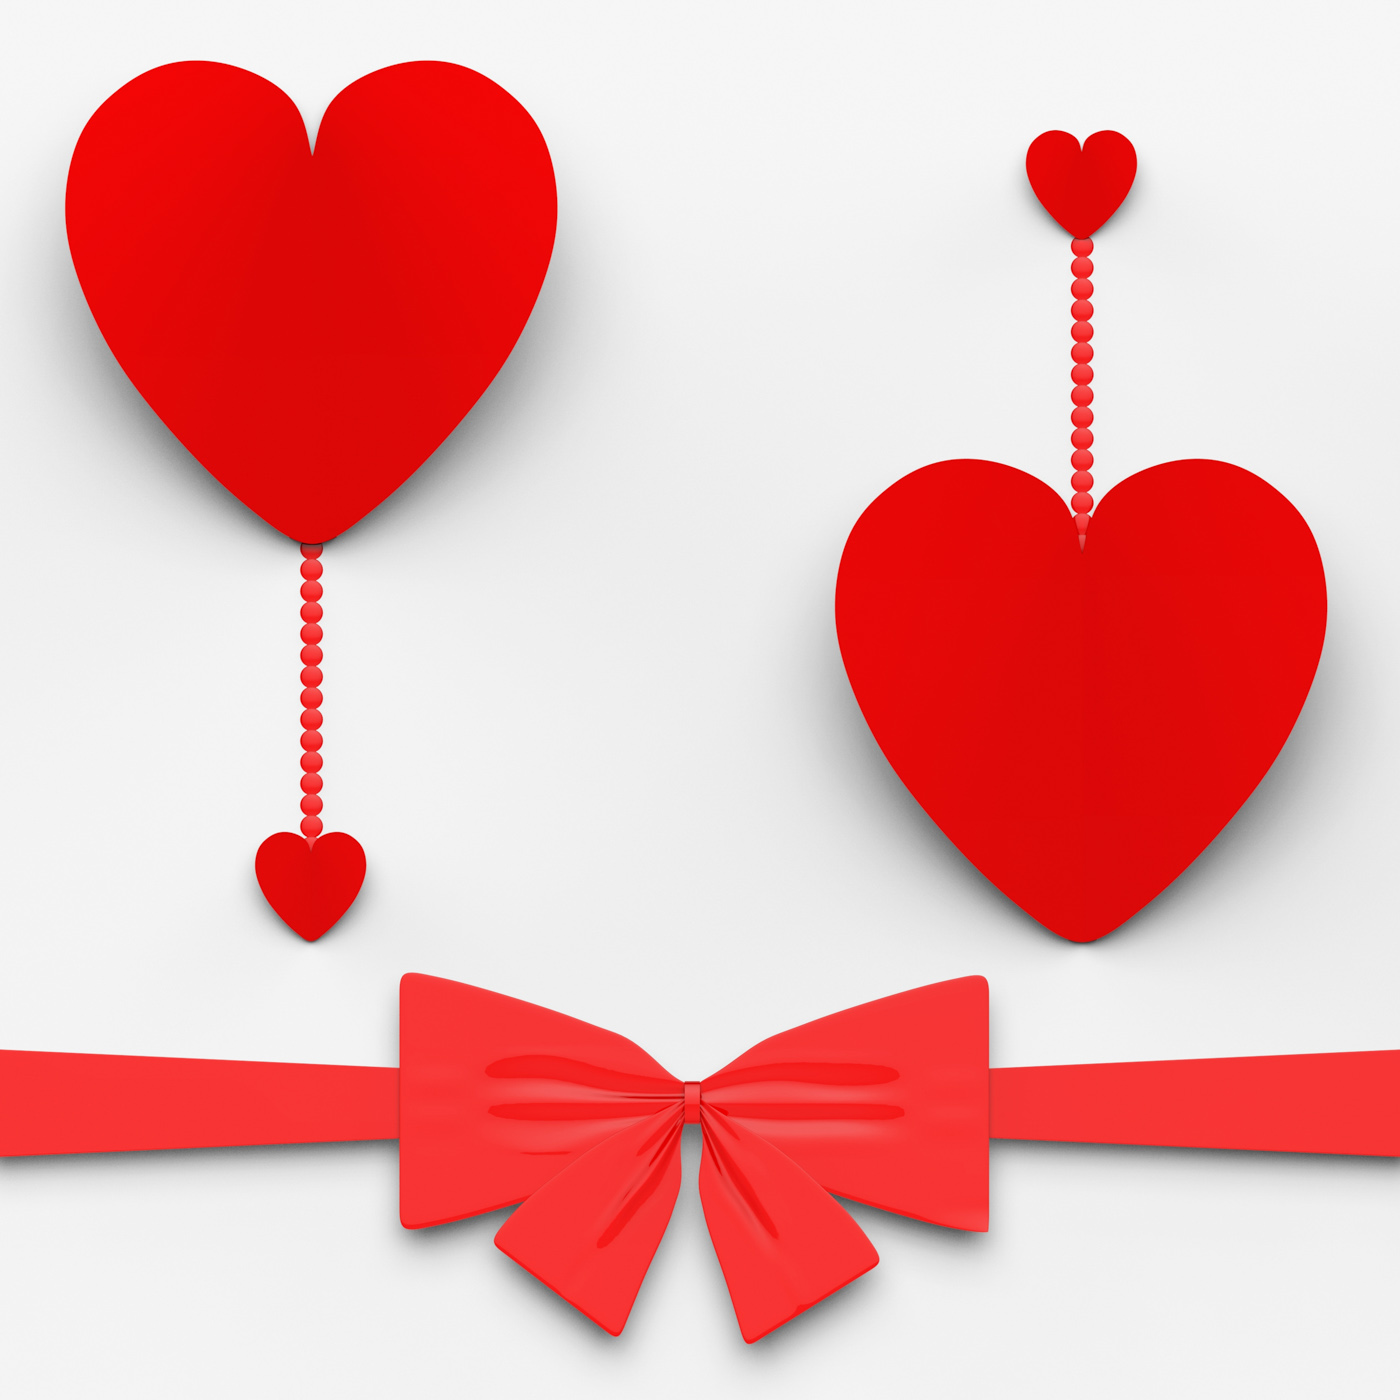 Two hearts with bow mean loving celebration or decoration photo